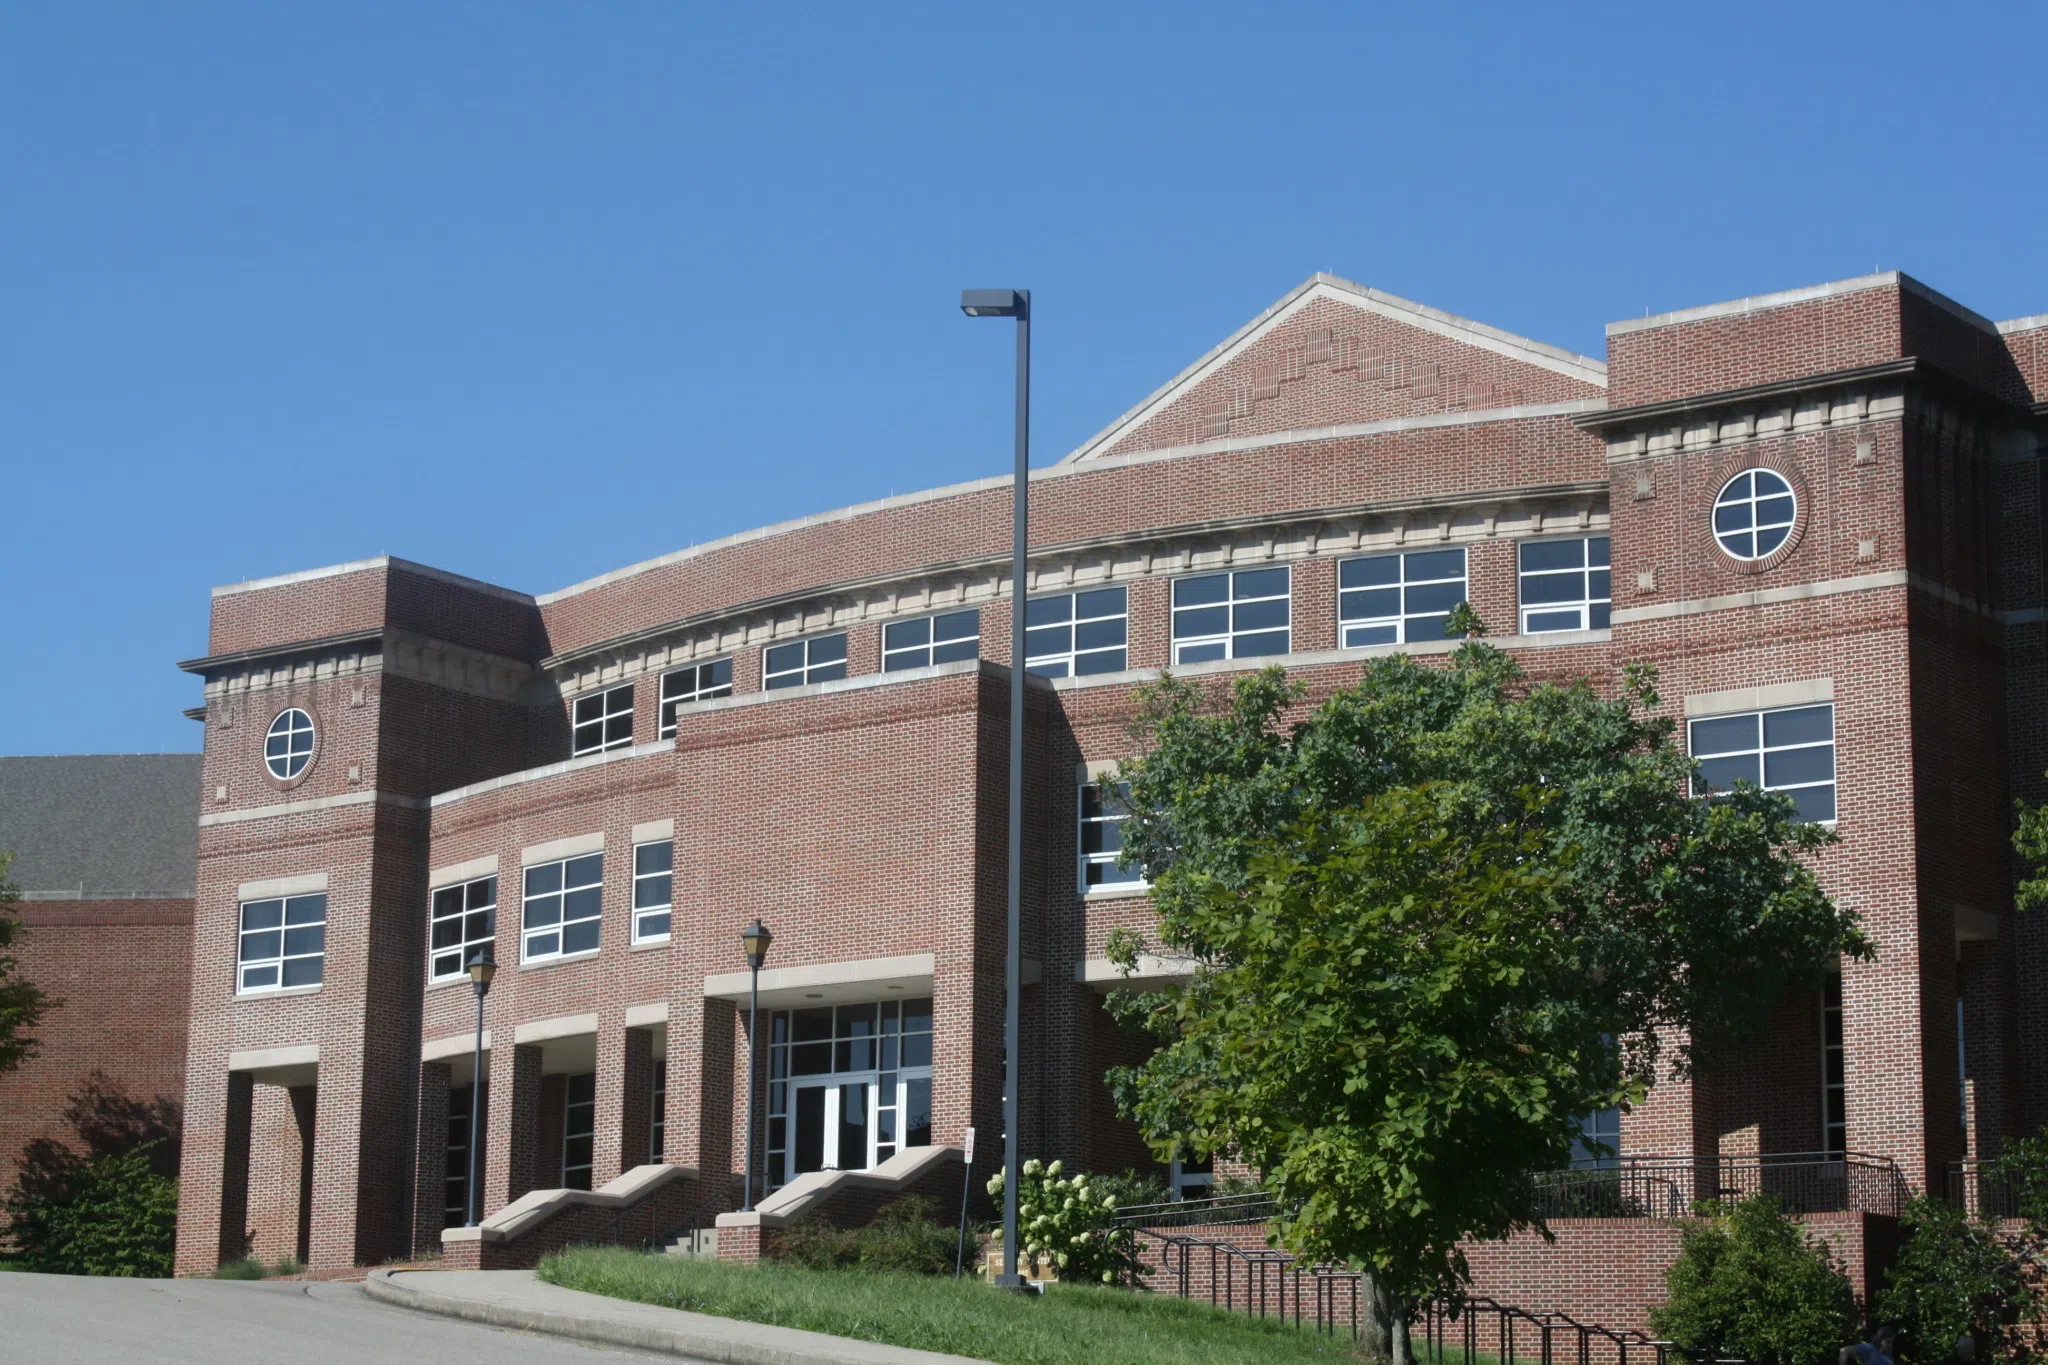  Large modern-looking red brick building with modern lines and large concrete steps. 